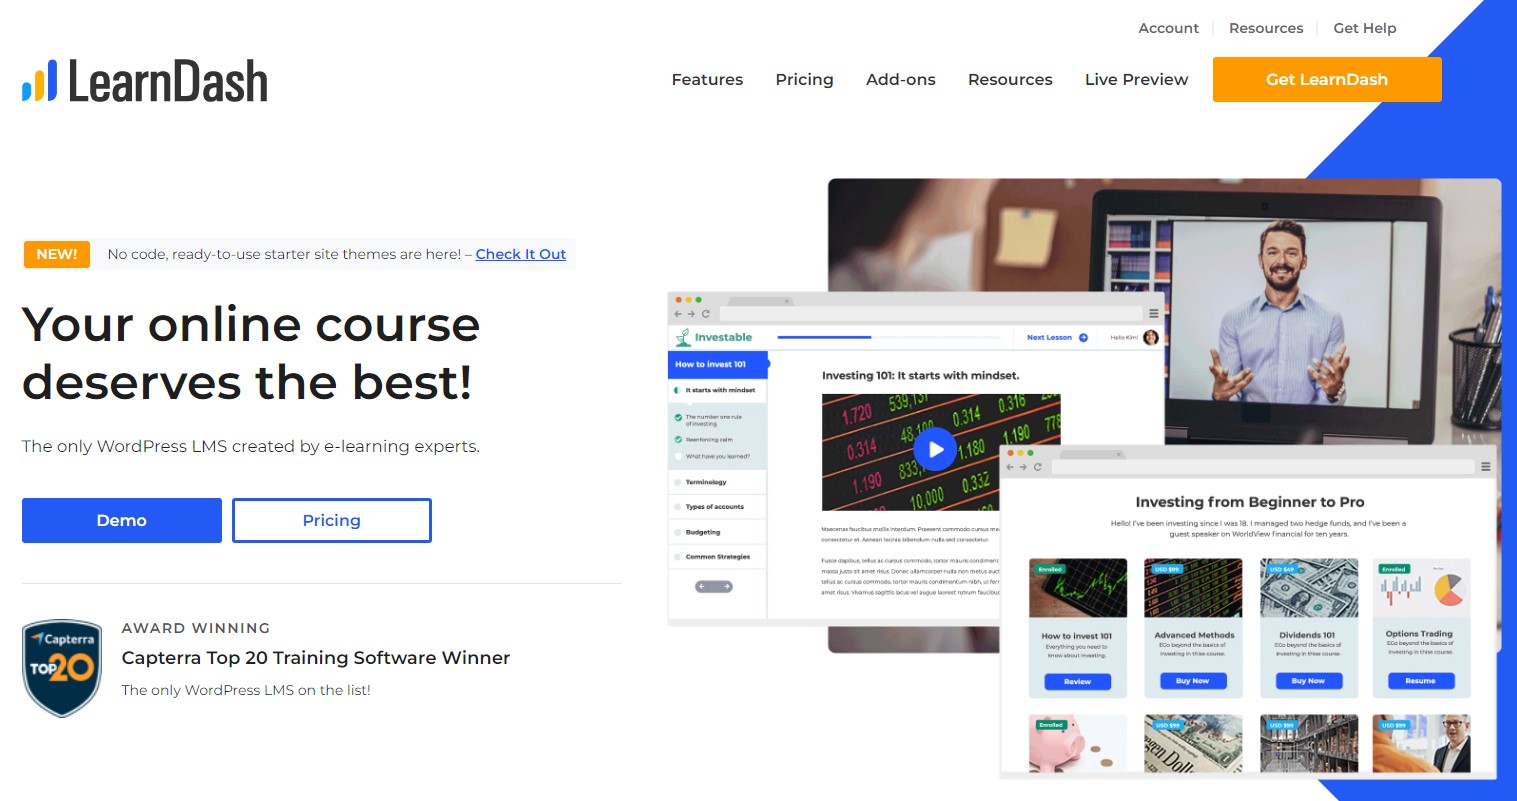 Learndash LMS is an online course creation software for creating online courses on a WordPress site that is quite popular among the community and has several features that make it unique from its competitors. 